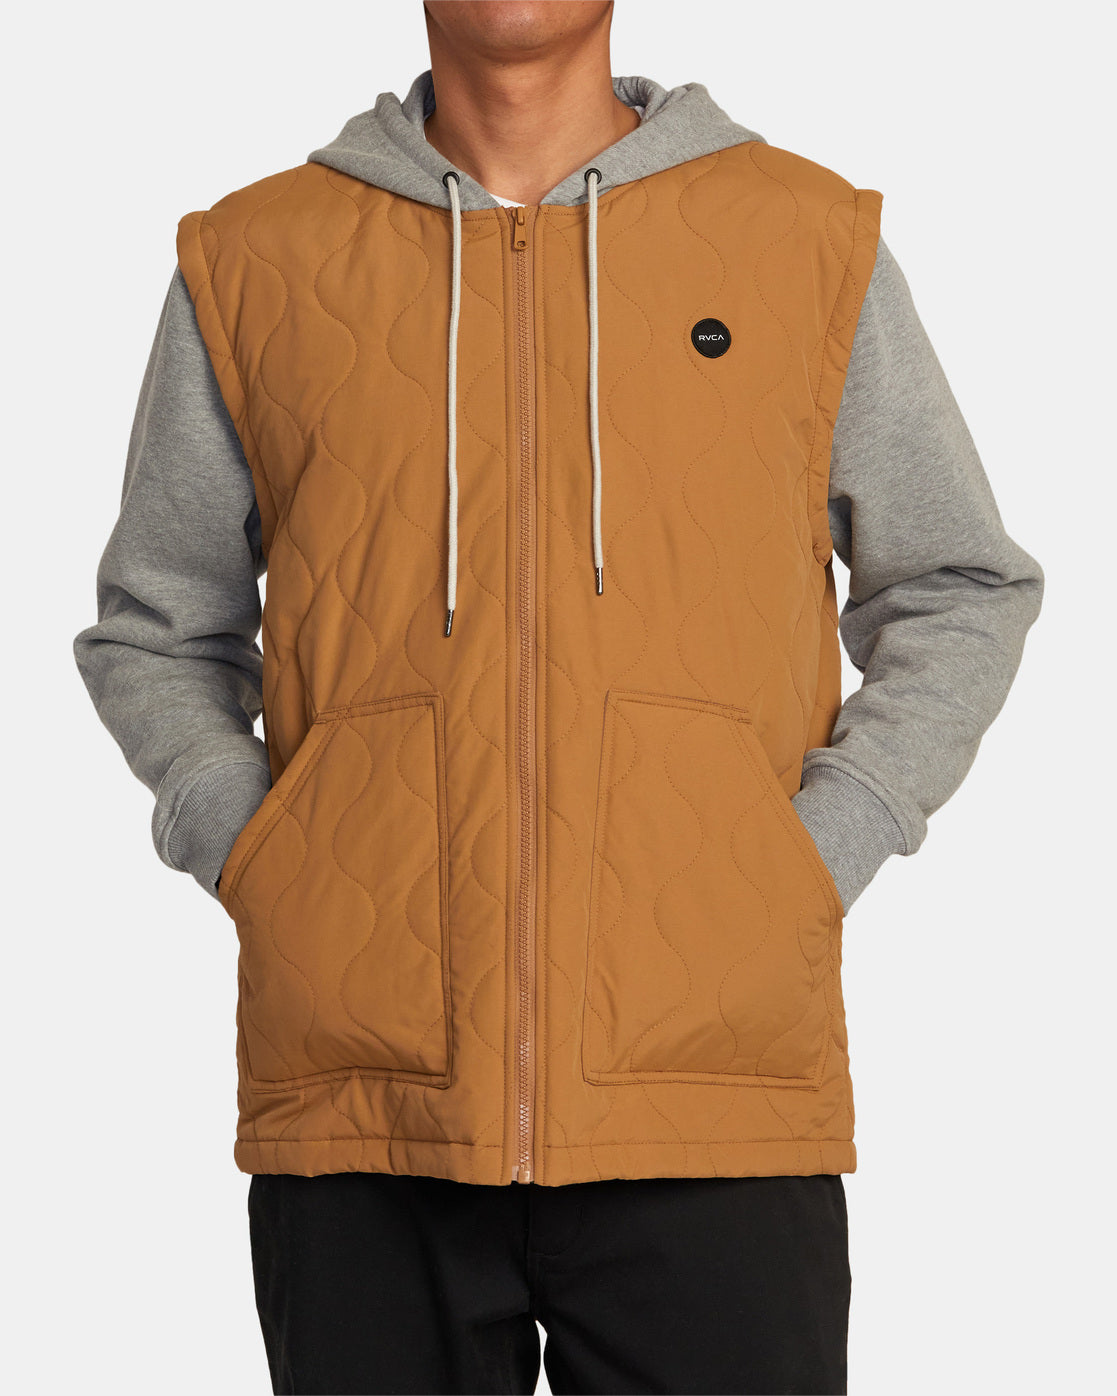 RVCA Grant Hooded Puffer Jacket